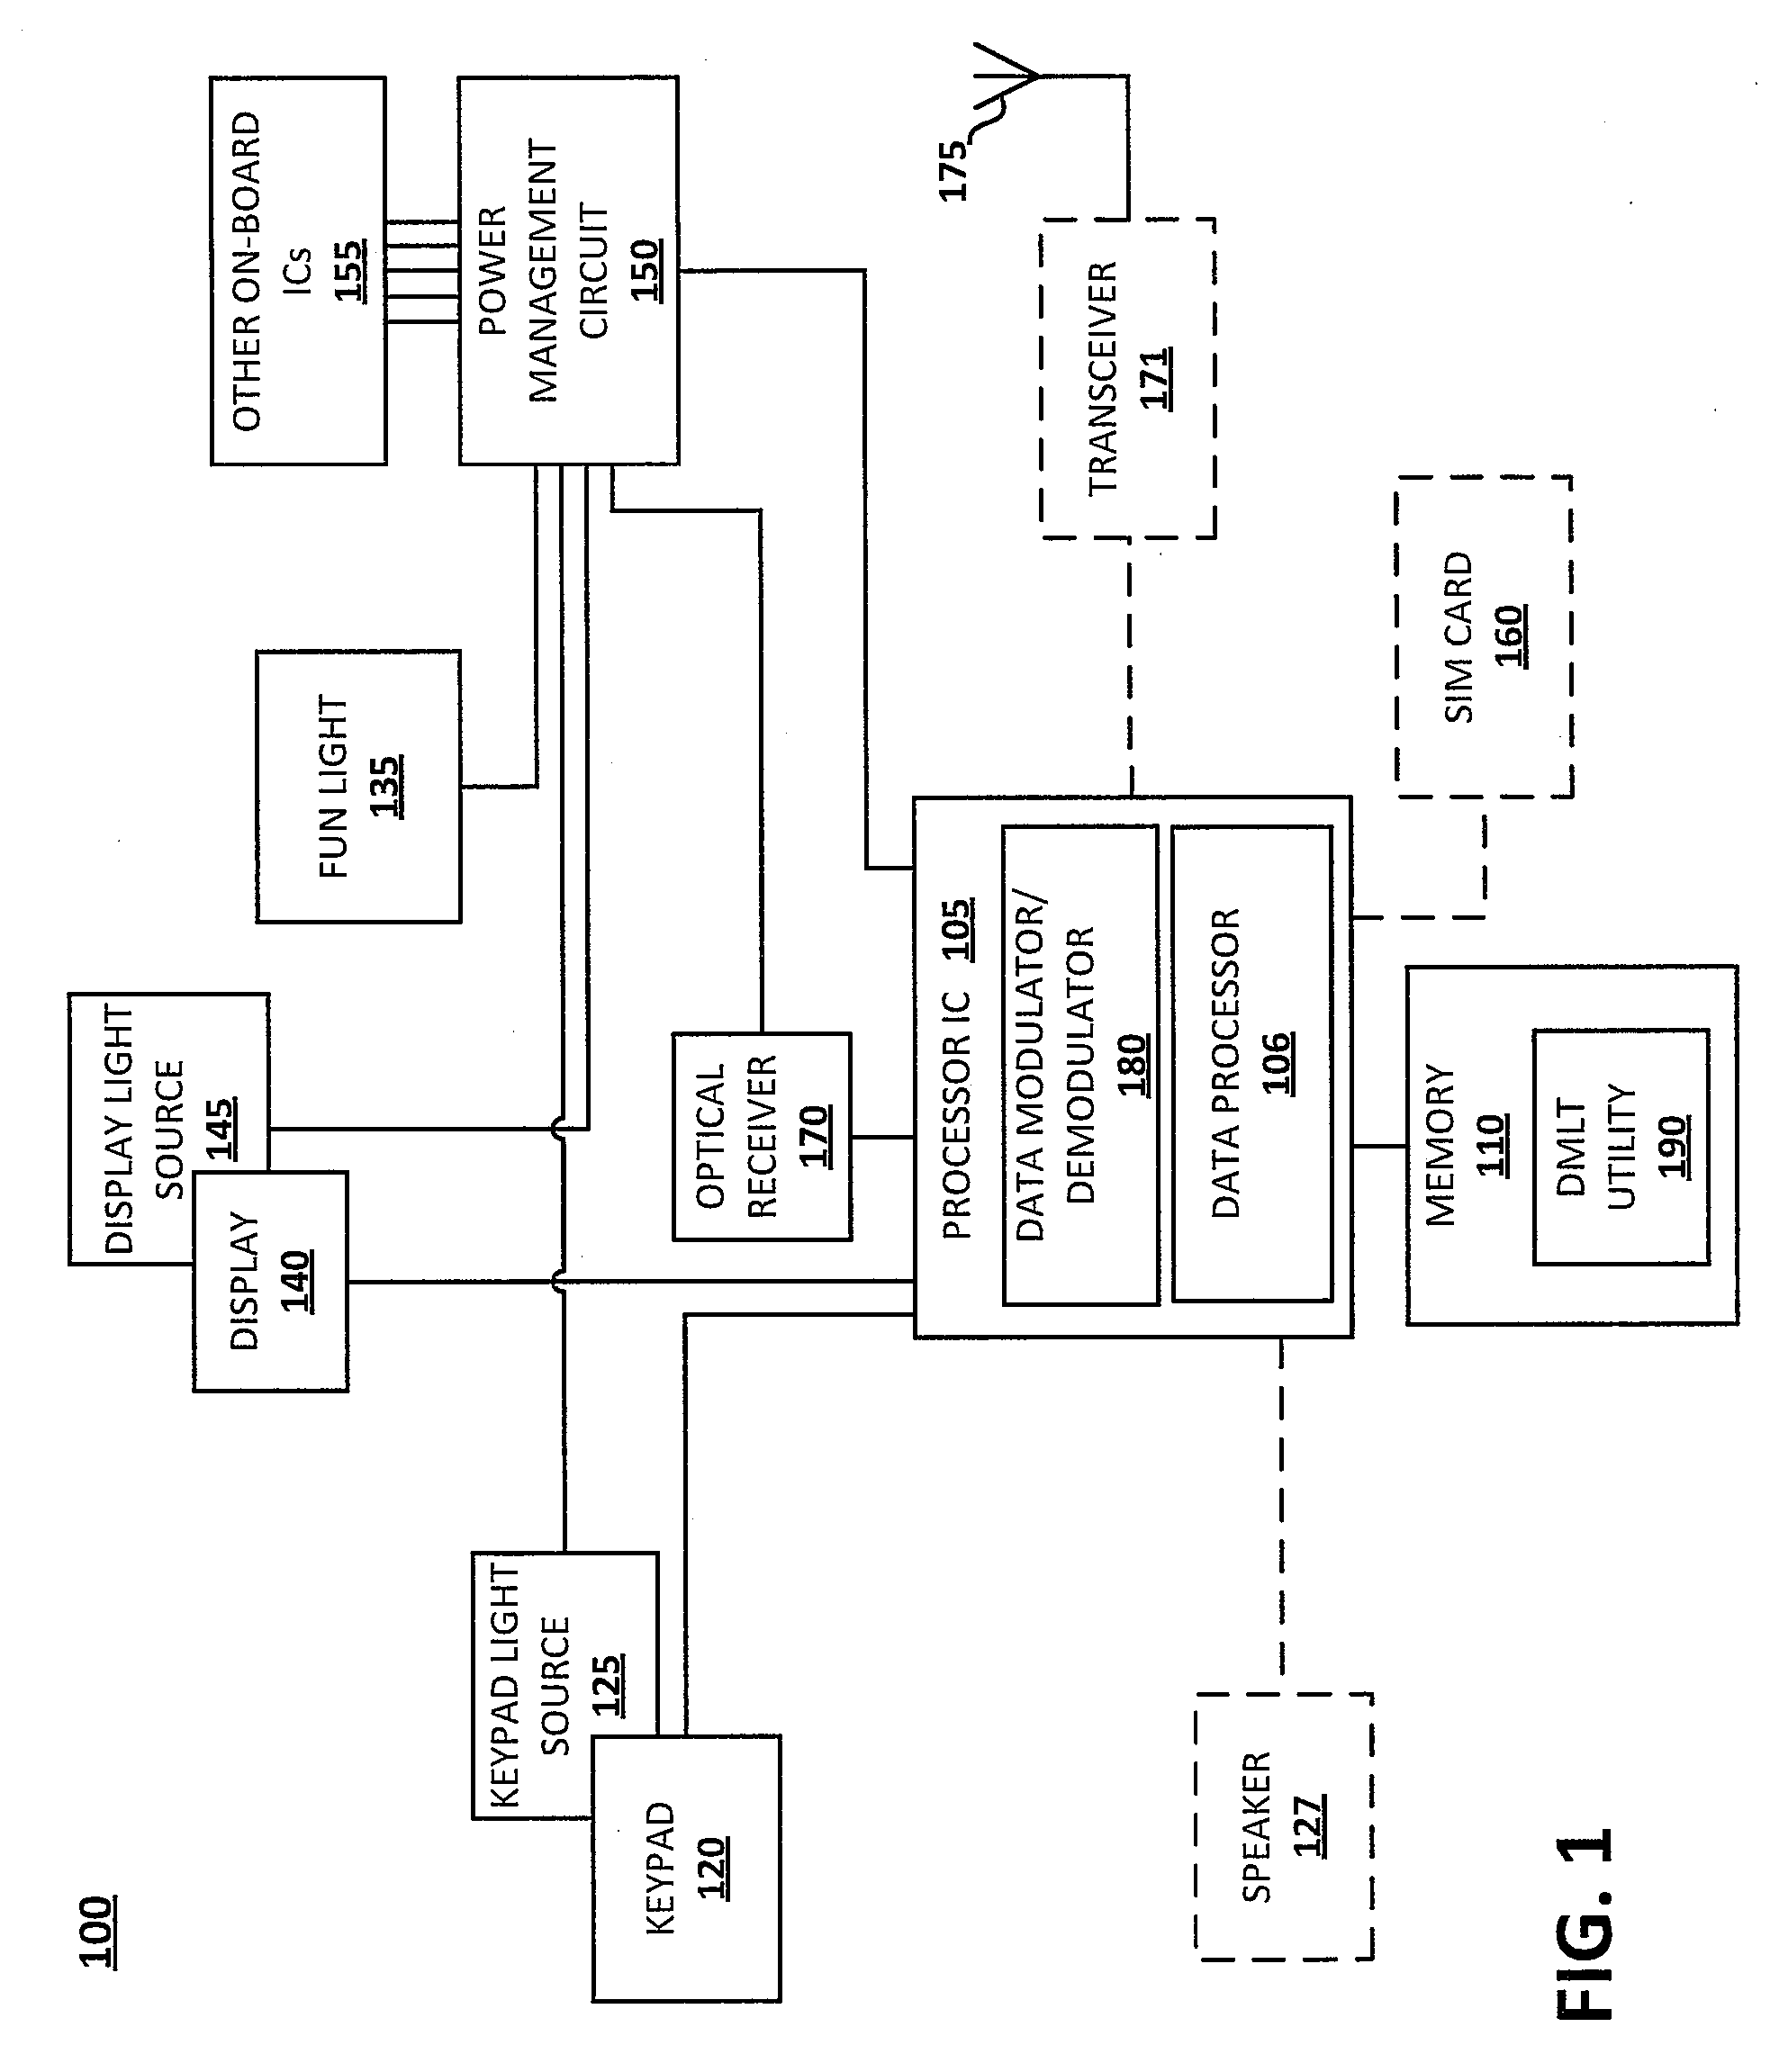 Synchronization and Processing of Secure Information Via Optically Transmitted Data